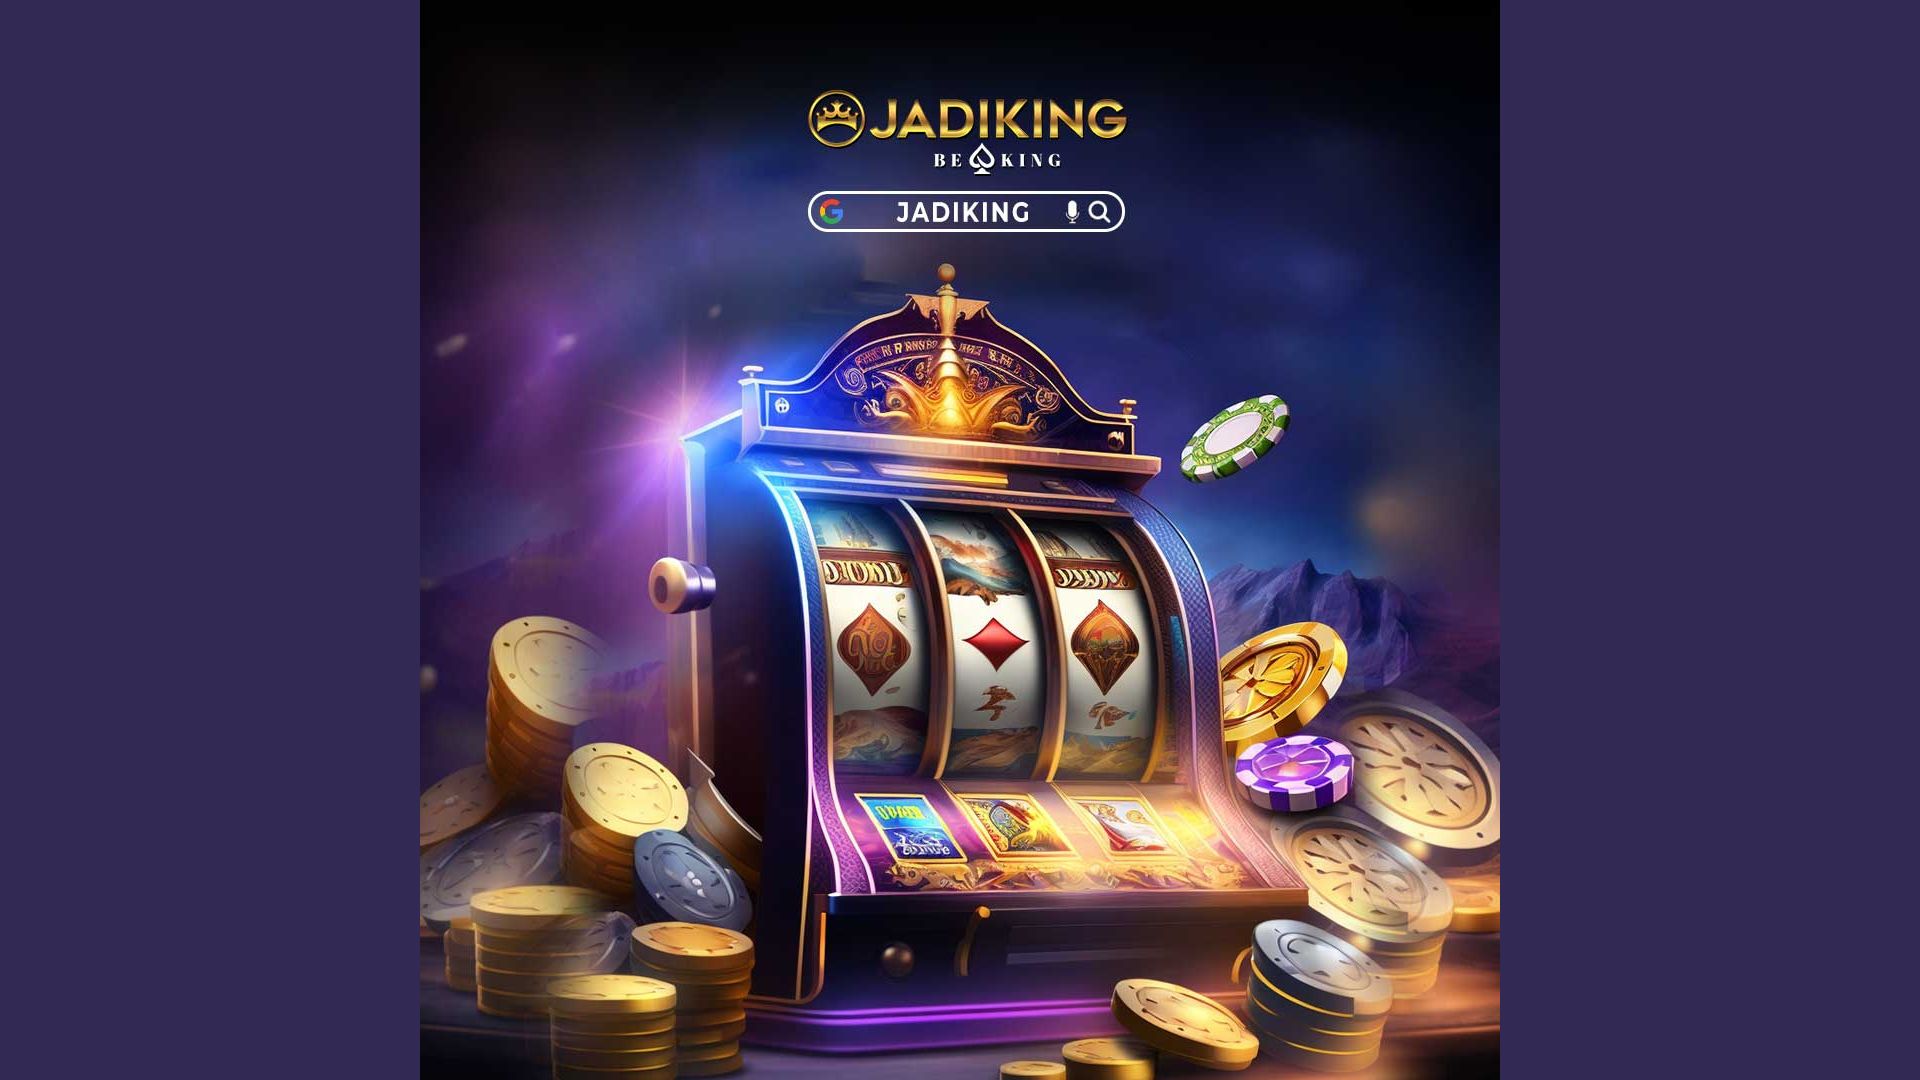 How to Claim Free Kredit RM10 Now with Jadiking88 Slot E Wallet?